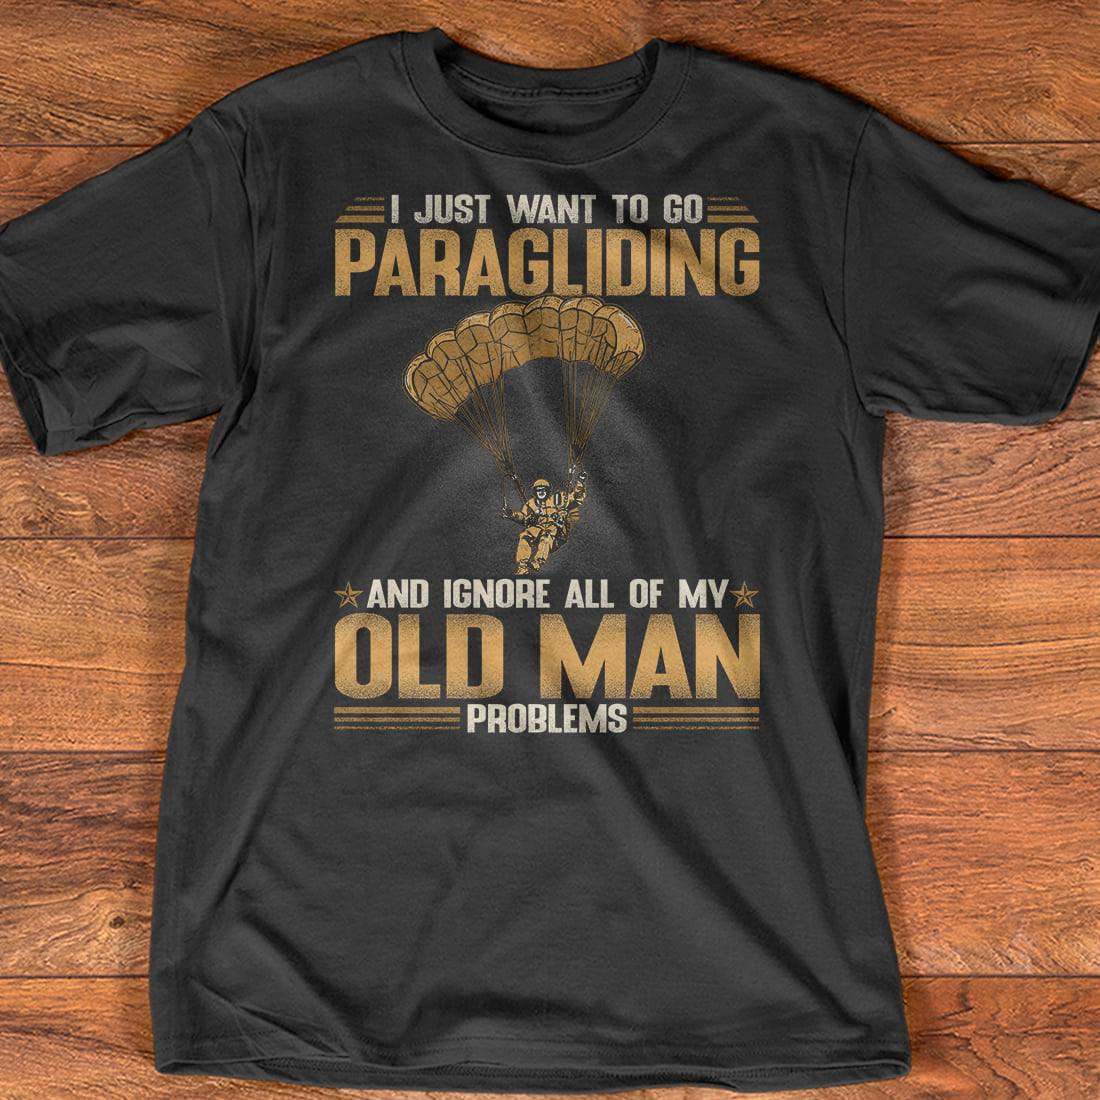 I just want to go paragliding and ignore all of my old man problems - Paragliding lover